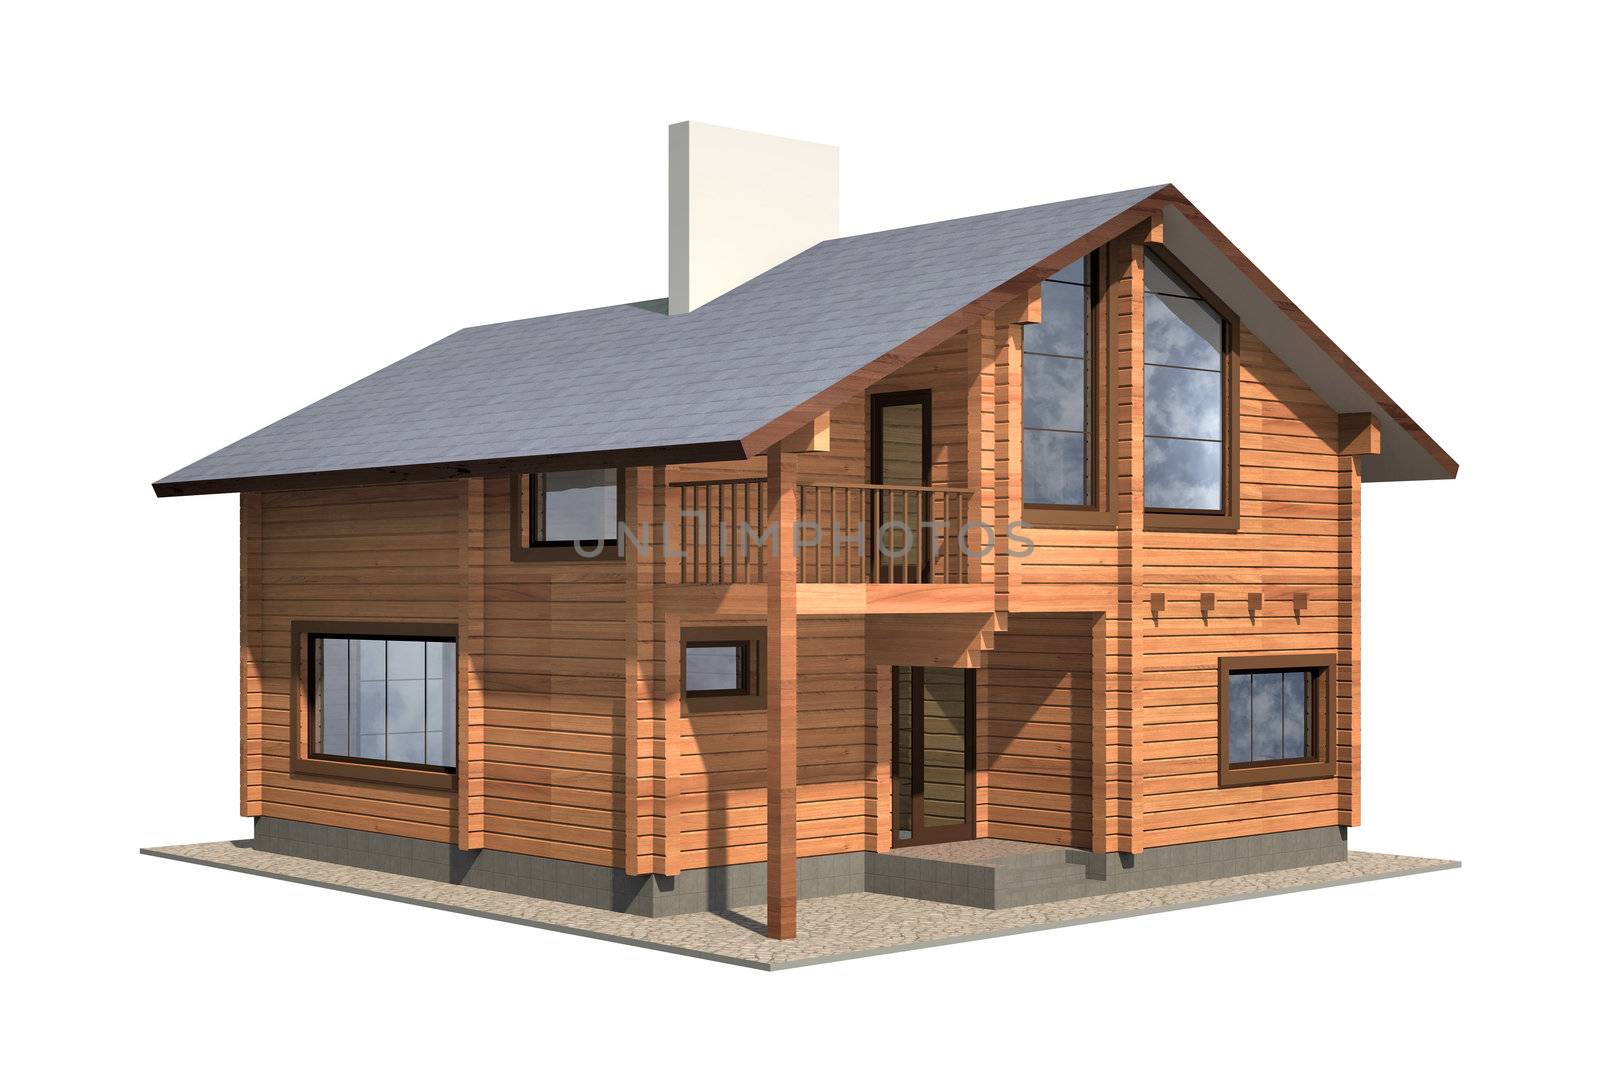 Residential house of wooden timber. 3d model render. Isolation on white background. Real estate